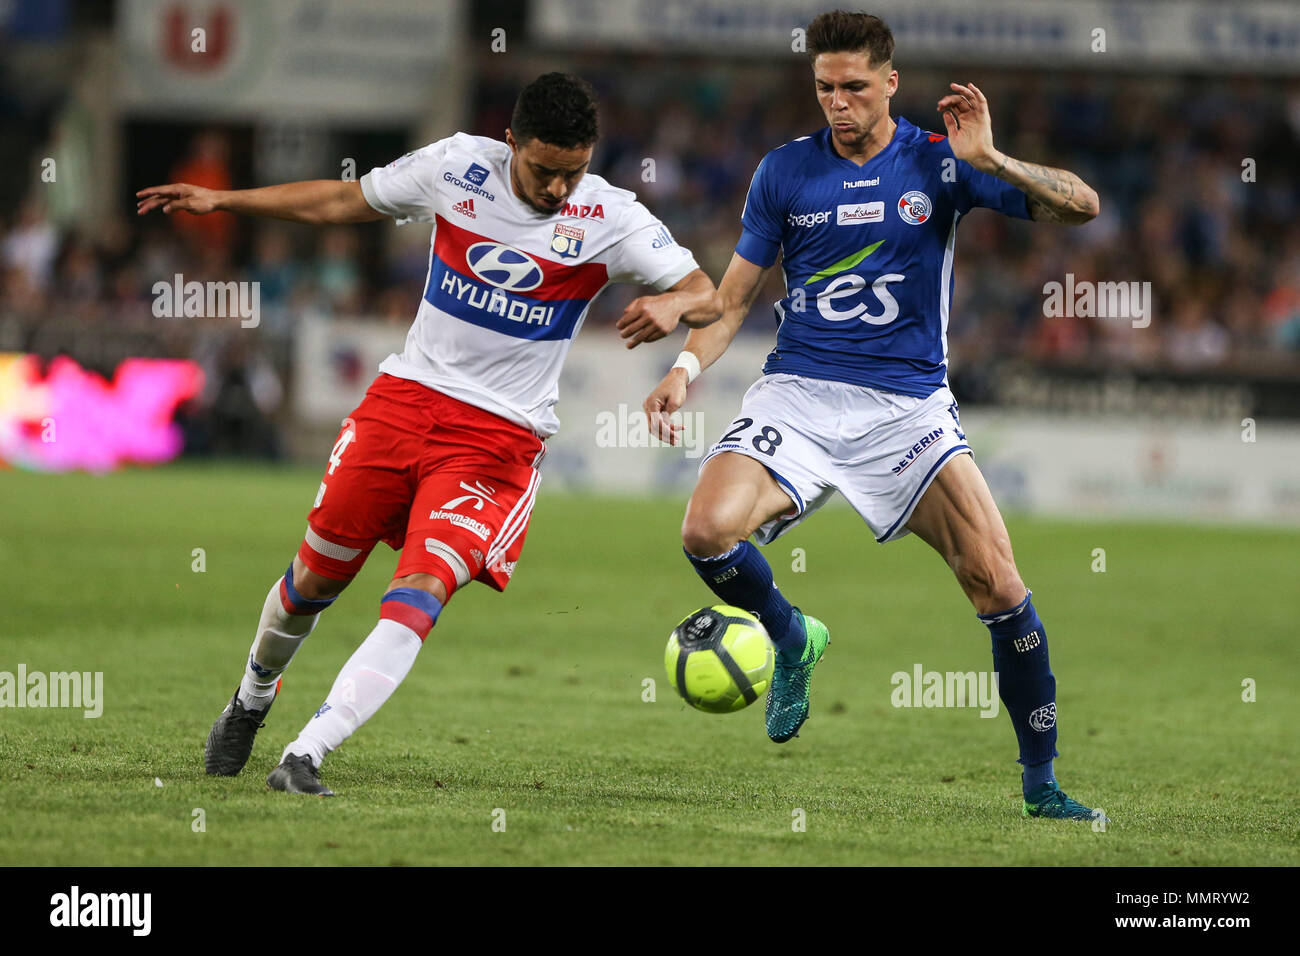 Strasburg, France. 12th May, 2018. Pereira Da Silva Rafael (L) and Martin Jonas (R) in action during the French L1 football match between Strasbourg (RCSA) and Lyon (OL) at the Meinau stadium. Final Score (Strasbourg 3 - 2 Lyon) Credit: SOPA Images Limited/Alamy Live News Stock Photo